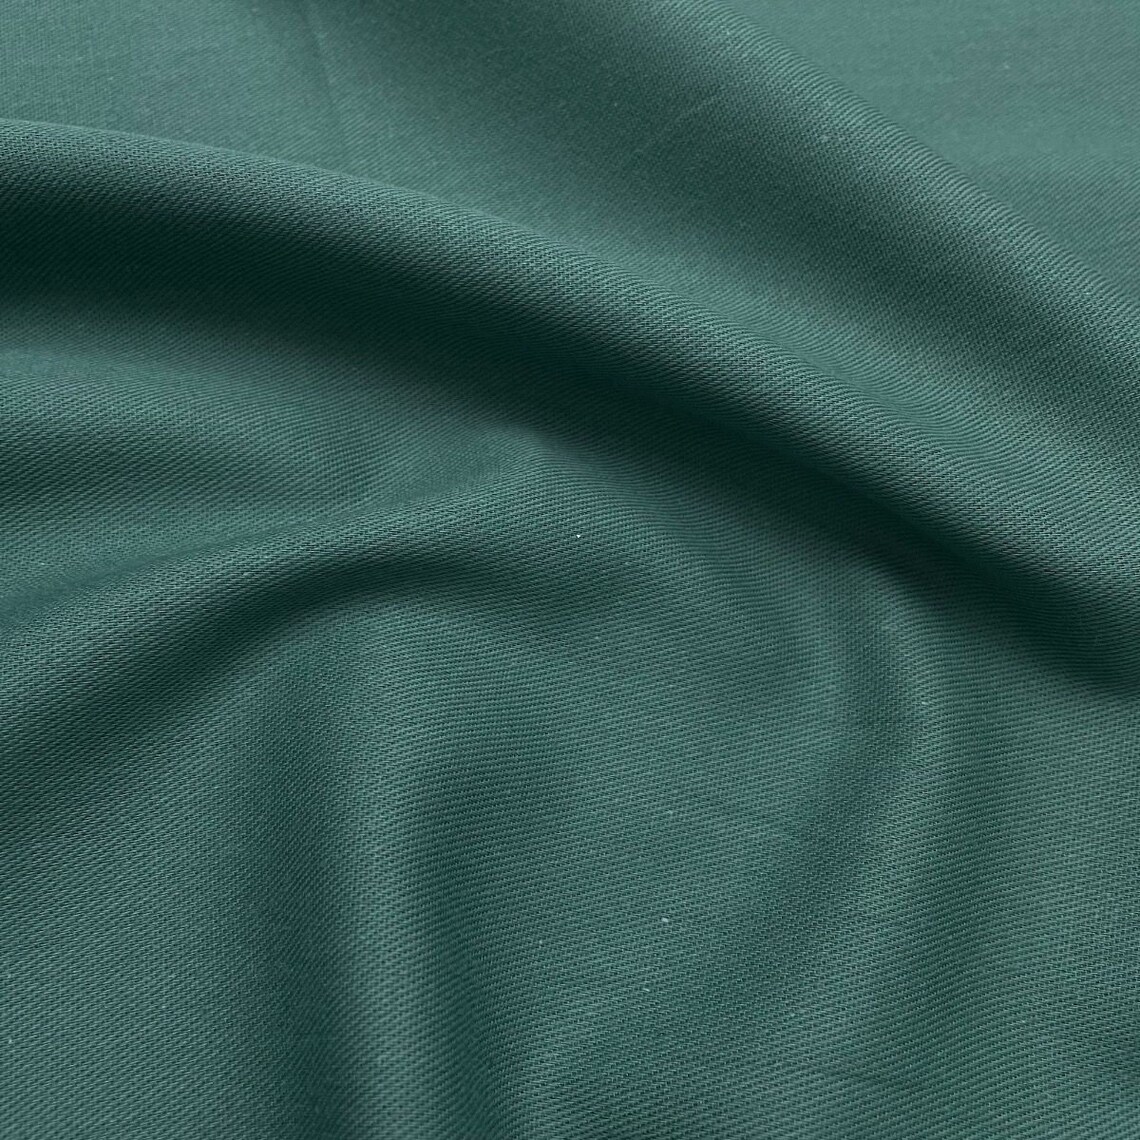 Plain 100% Cotton Drill Twill Fabric Forest Green - Etsy